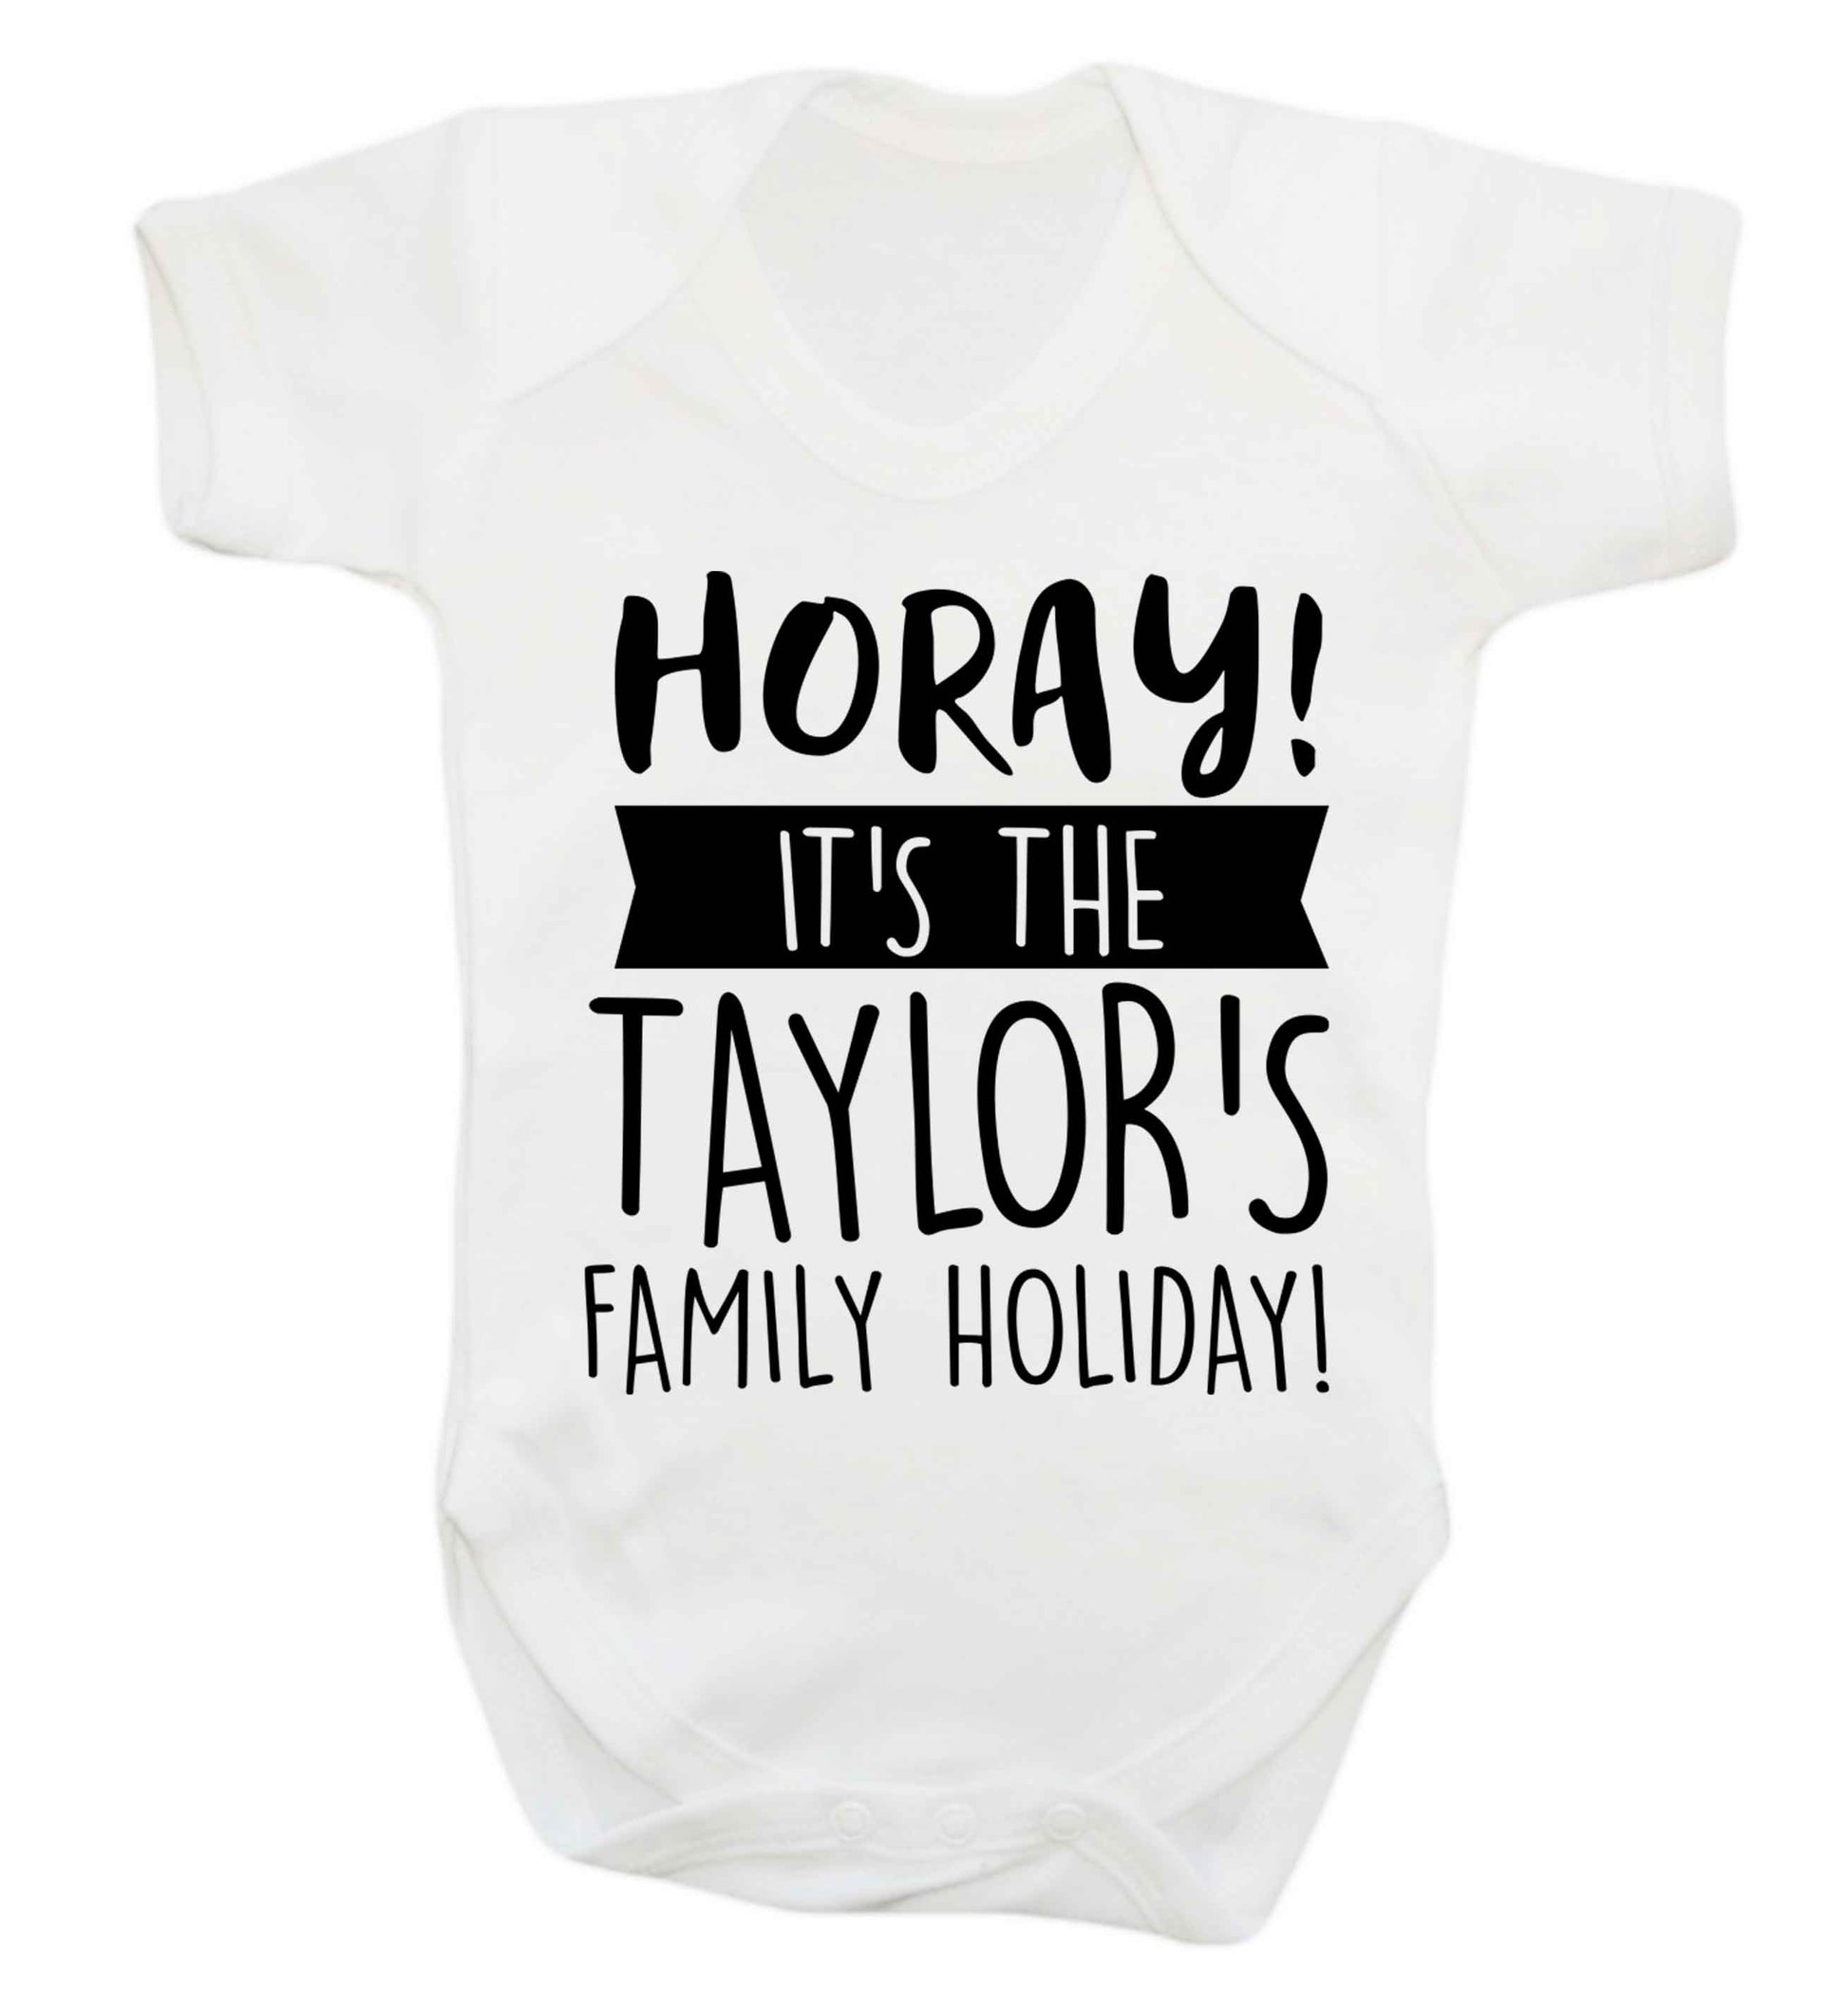 Horay it's the Taylor's family holiday! personalised item Baby Vest white 18-24 months